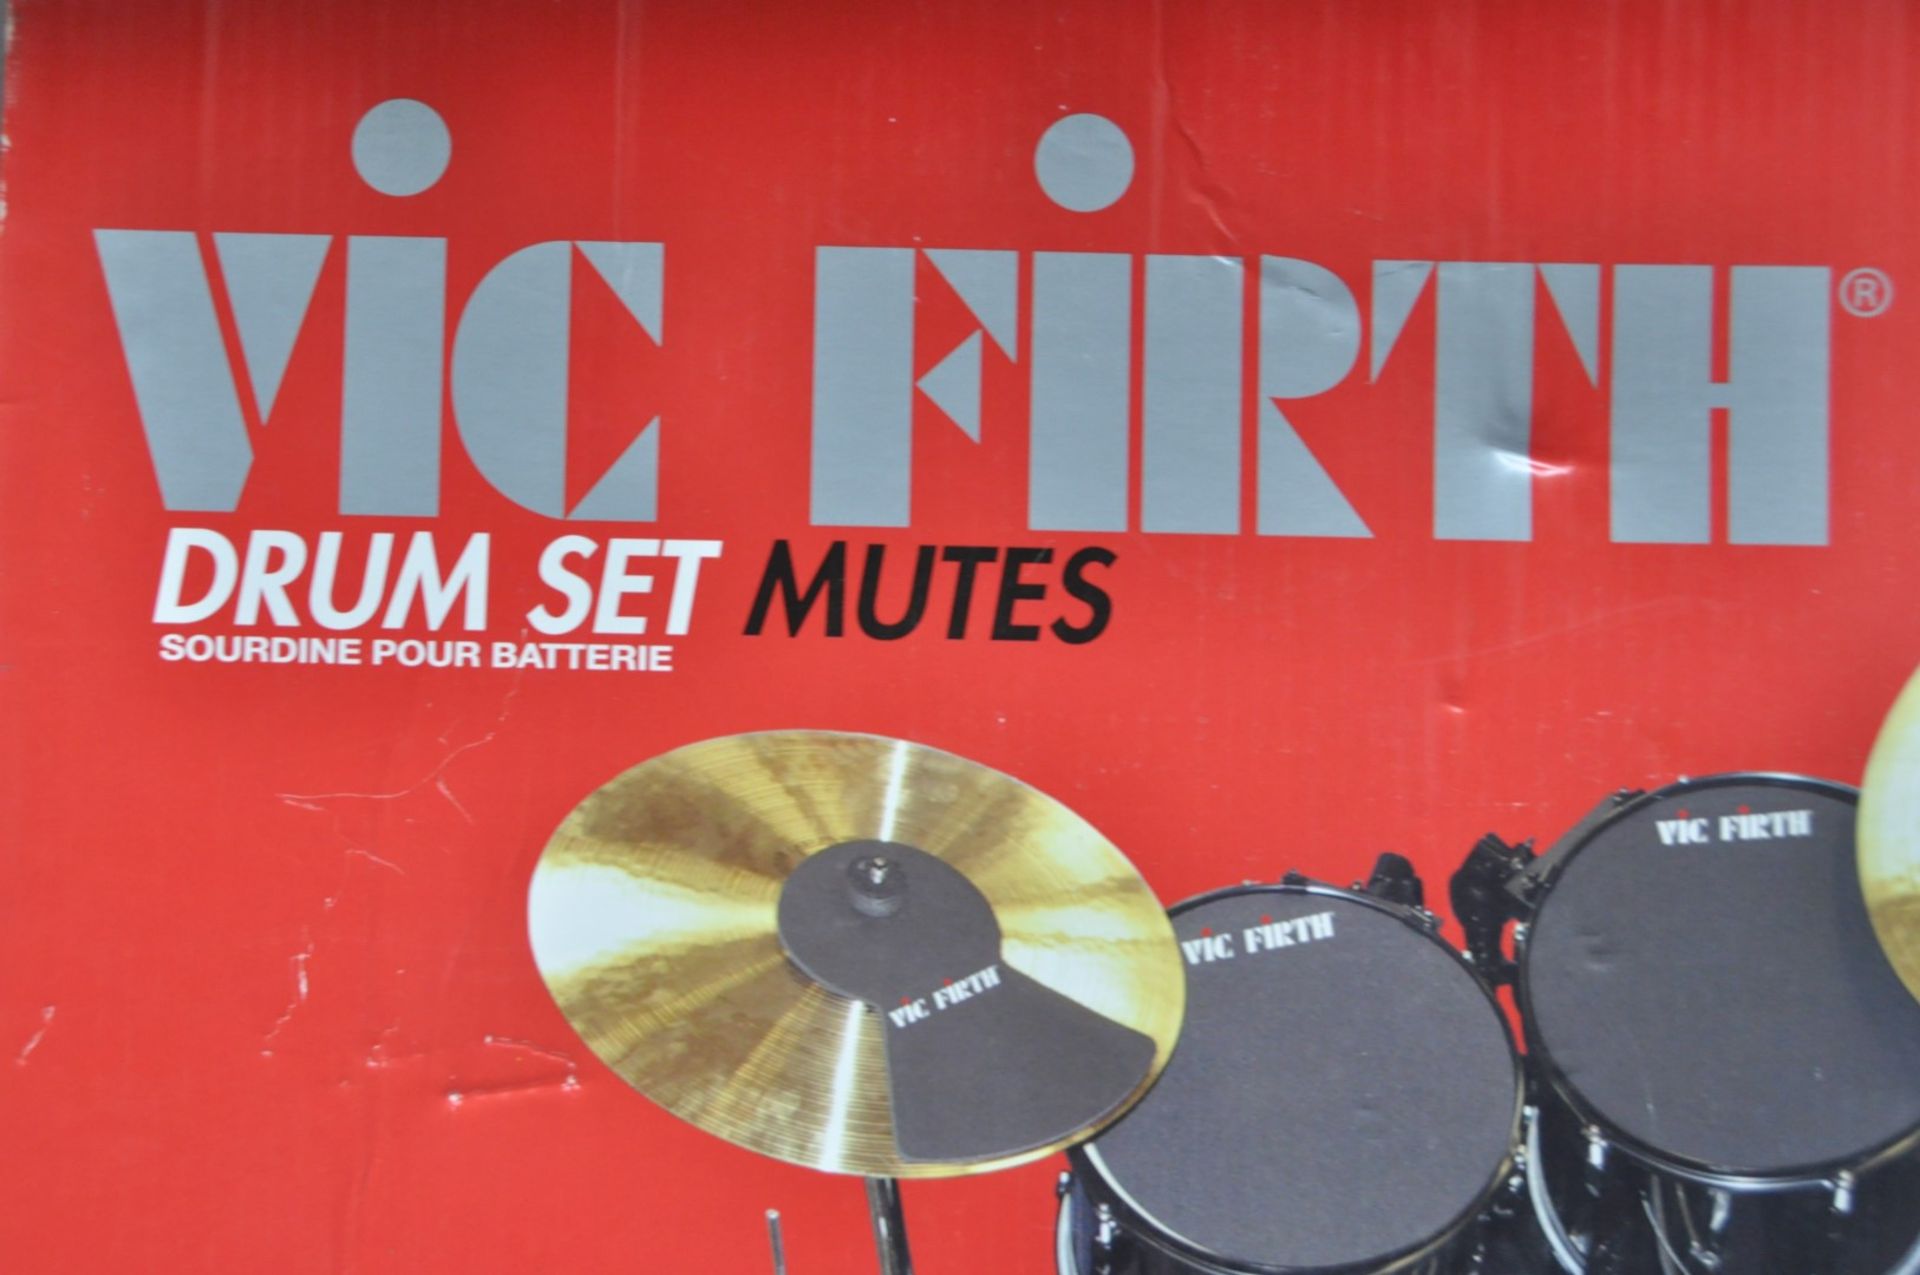 1 x Vic Firth Drum Set Mutes - Complete Standard Kit - CL020 - Ref Pro55 - Unused Stock - - Image 3 of 3